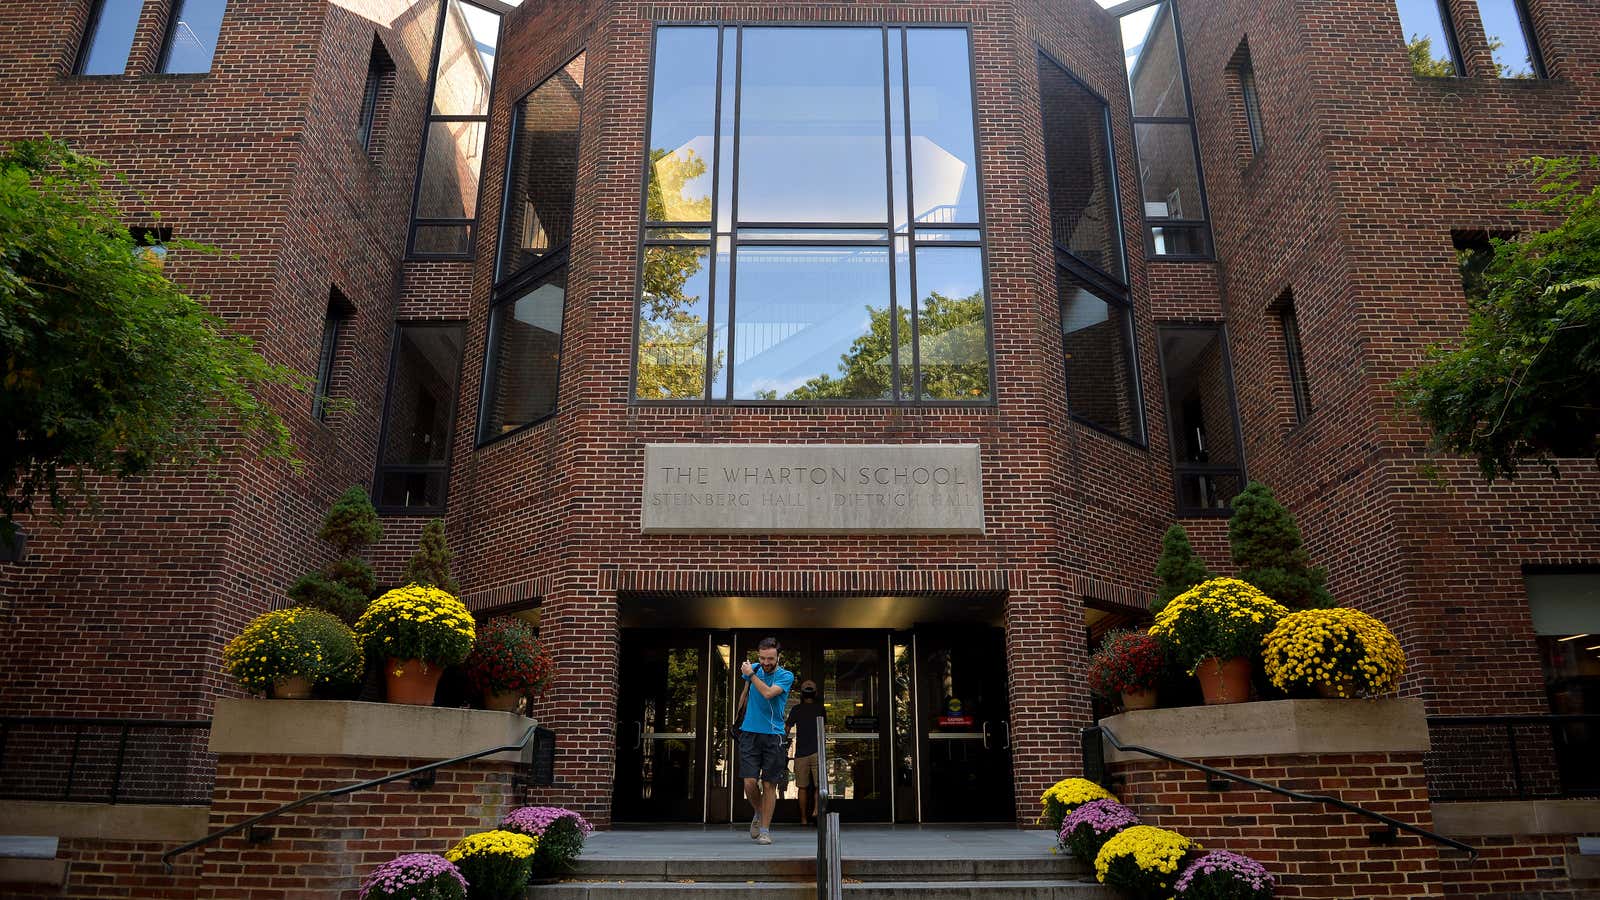 A student leaves the Wharton School of Business on the campus of the University of Pennsylvania in Philadelphia, Pennsylvania, U.S., September 25, 2017.